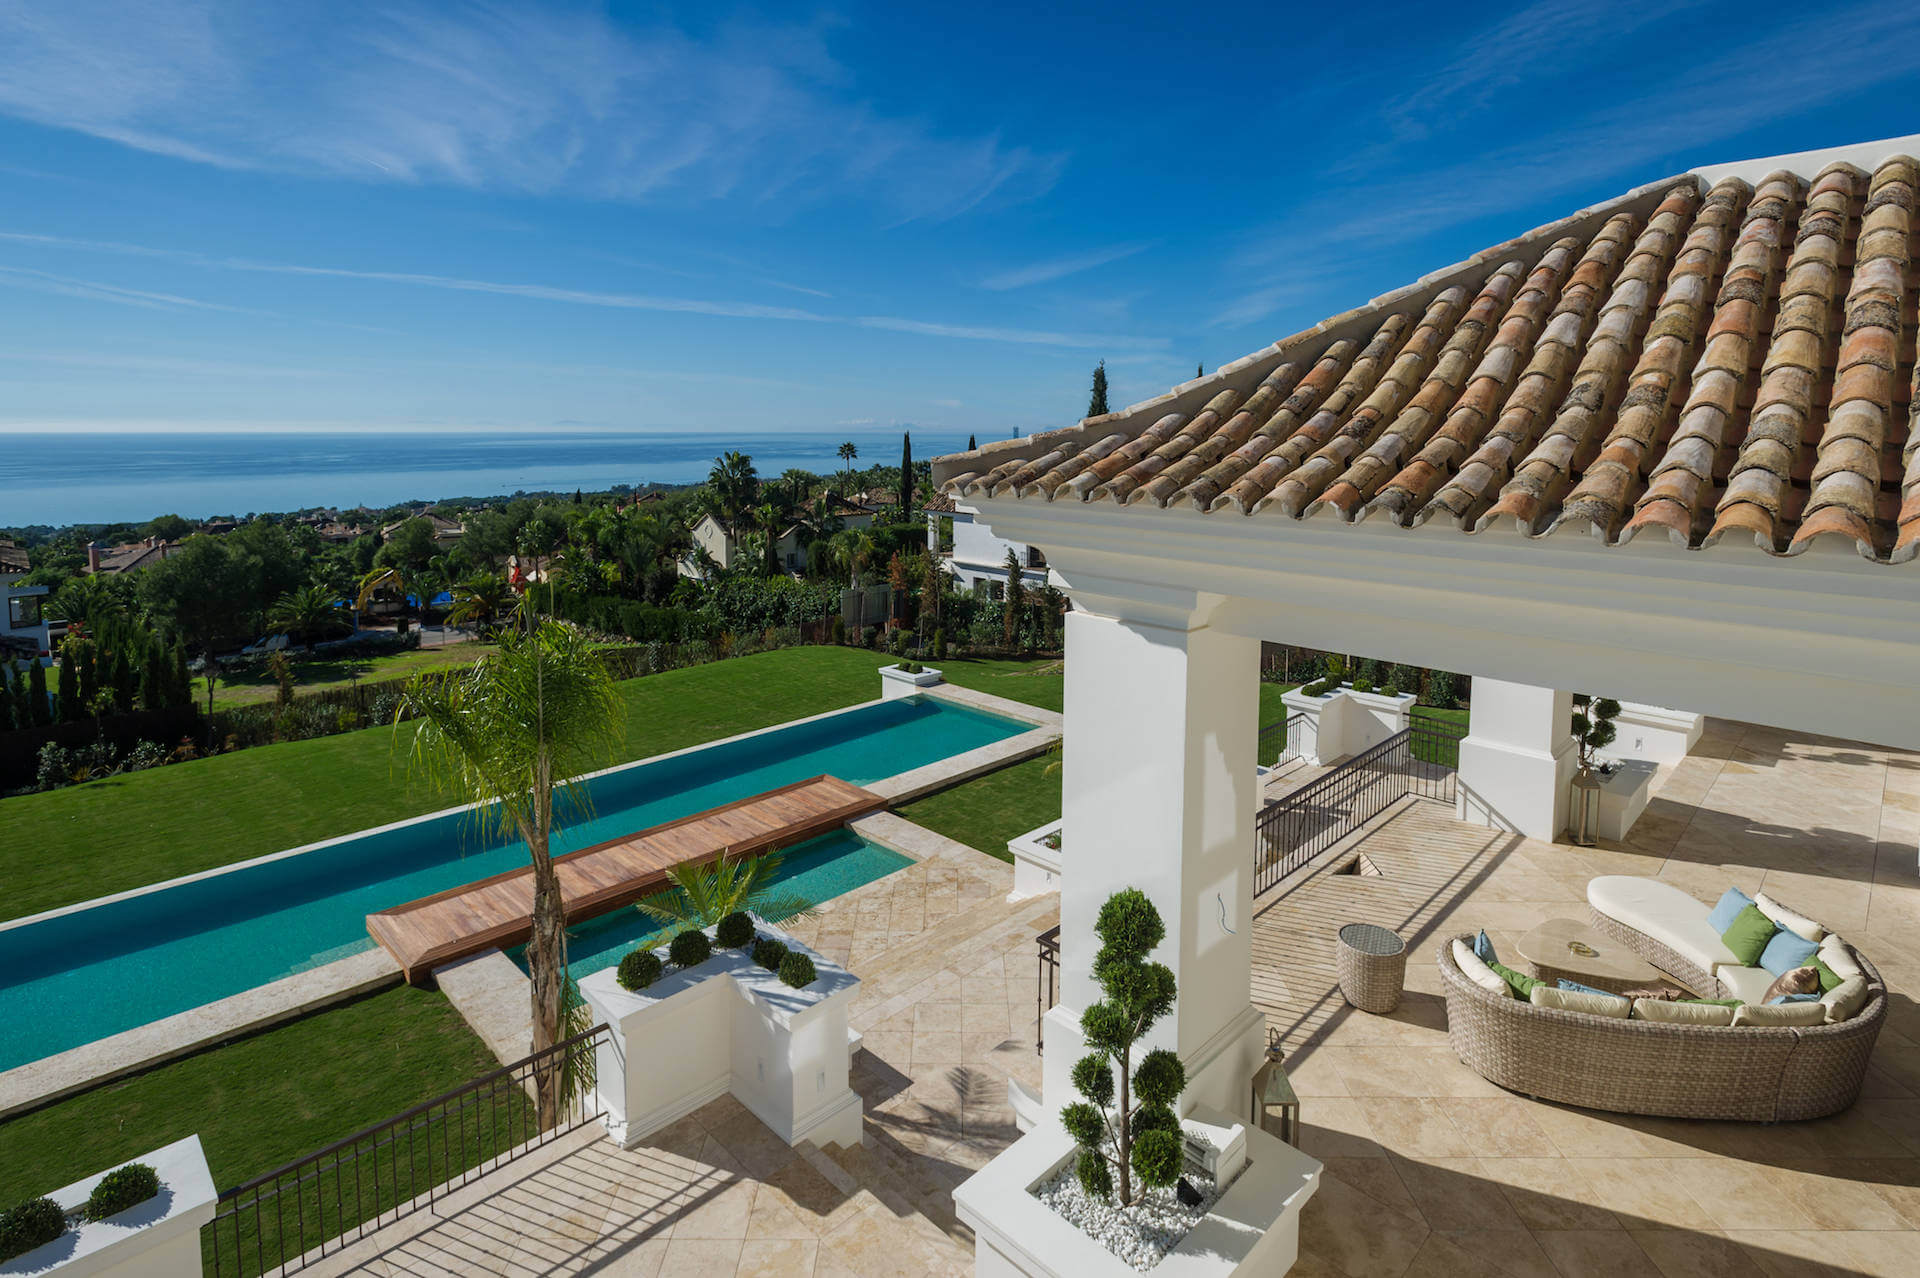 Sierra Blanca: Private exclusivity at the heart of Marbella